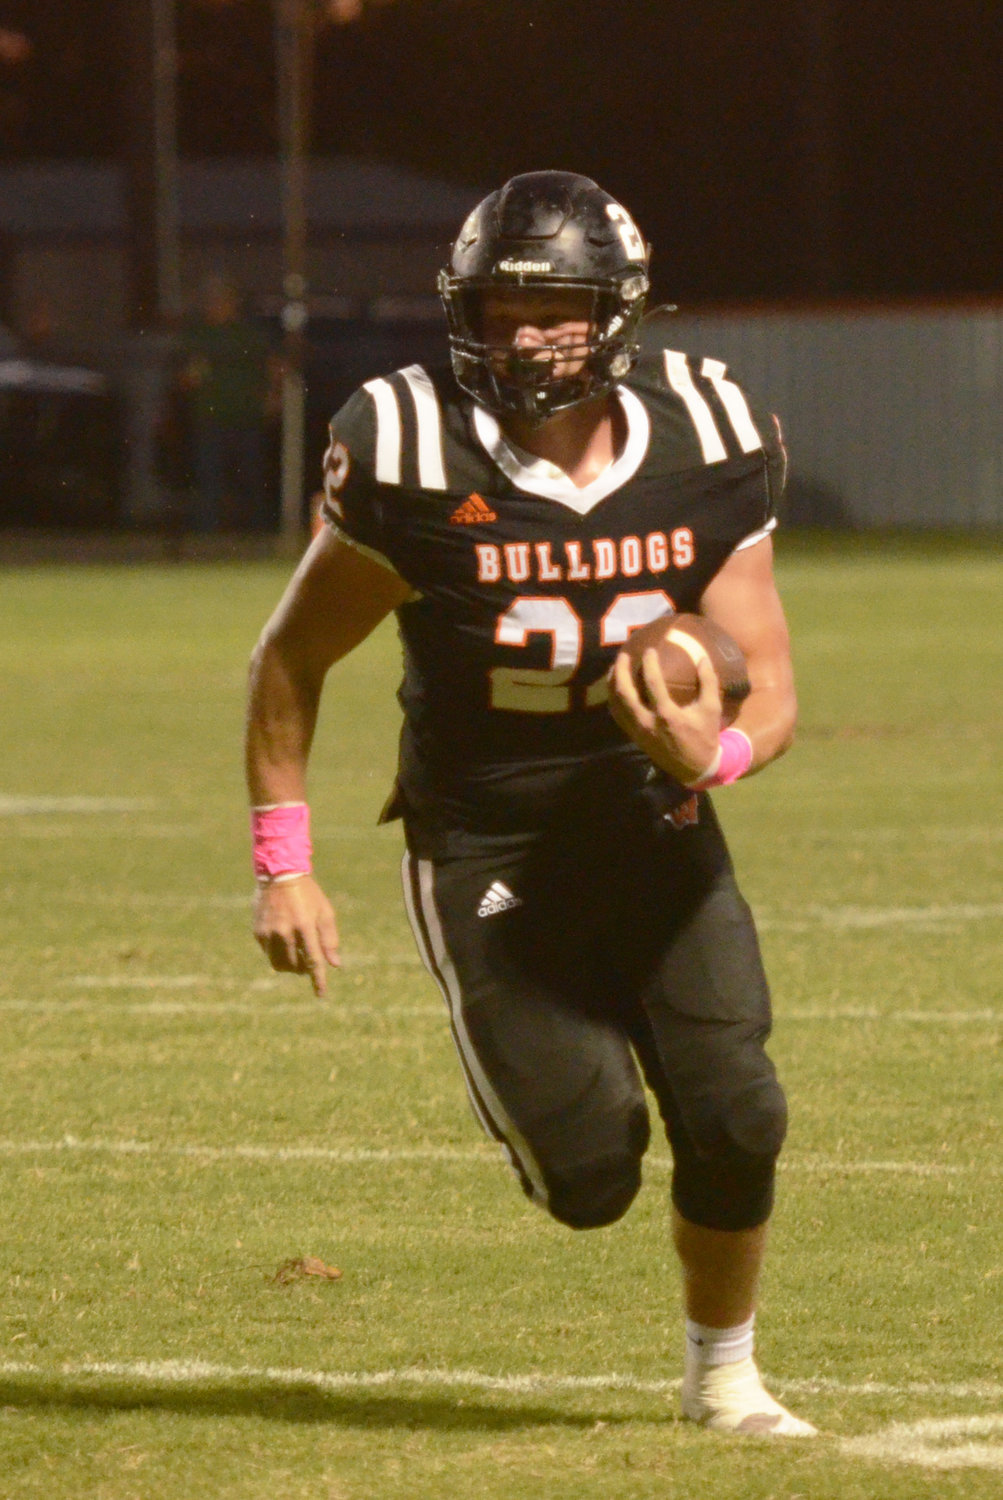 Wayne senior Brannon Lewelling rumbles down the field with the ball. Lewelling and Co. travel to Ringling Friday night.